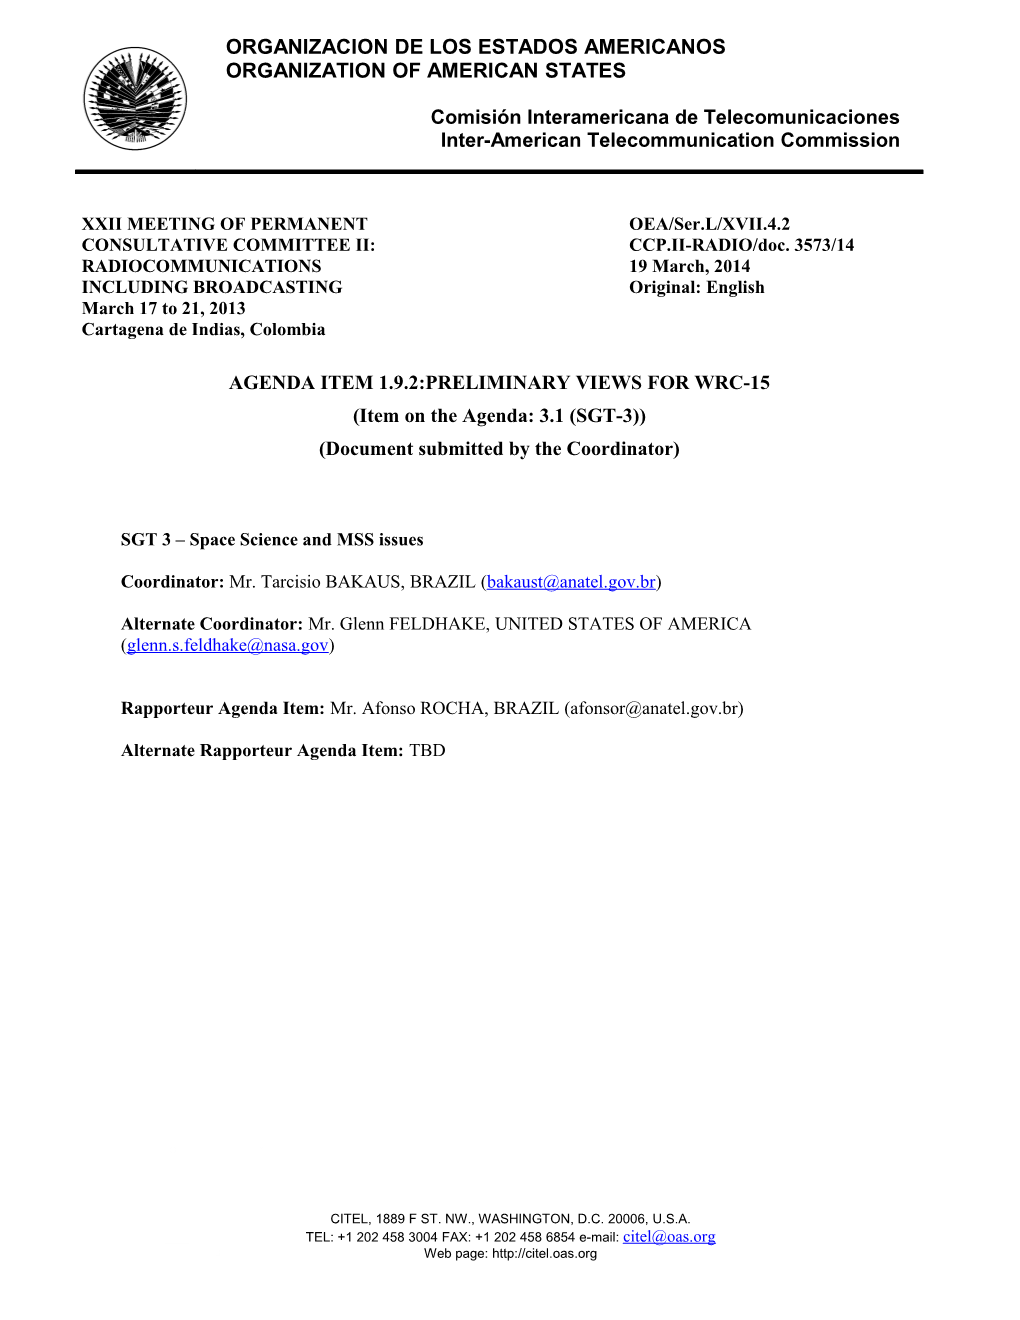 AGENDA ITEM 1.9.2: PRELIMINARY VIEWS for WRC-15. (Document Submitted by the Coordinator)